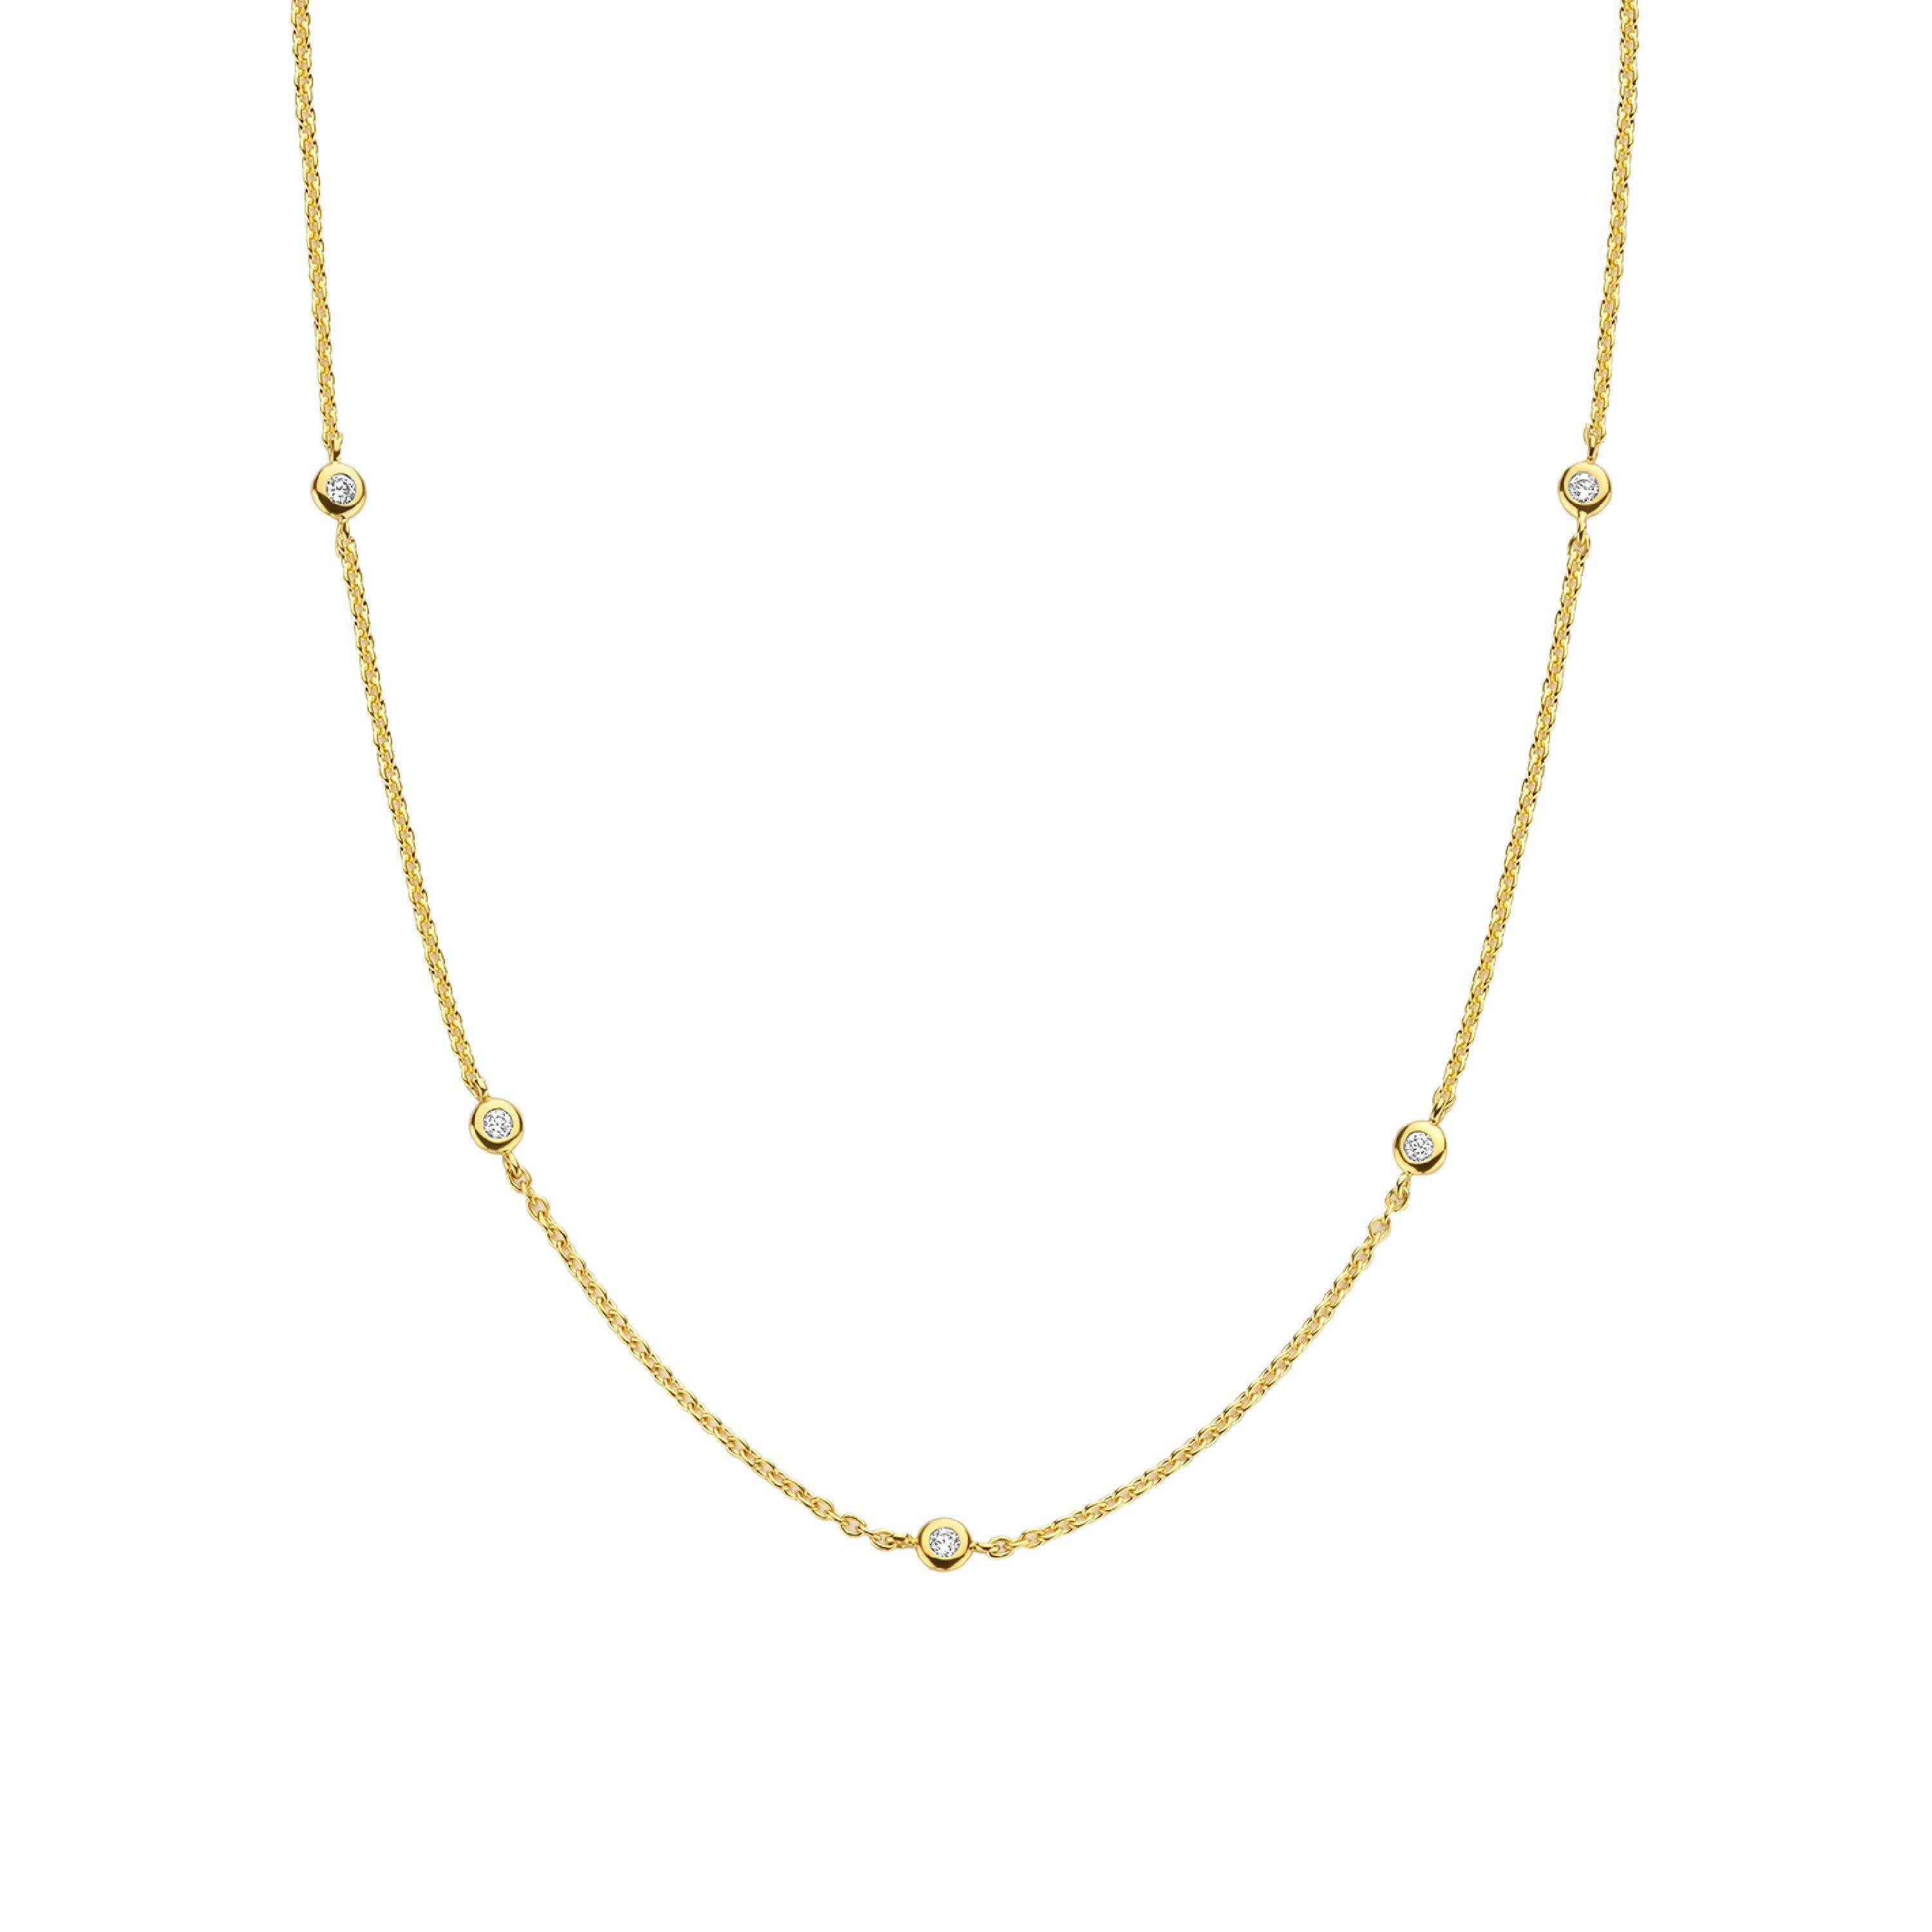 Zirconia By the Yard Golden Necklace